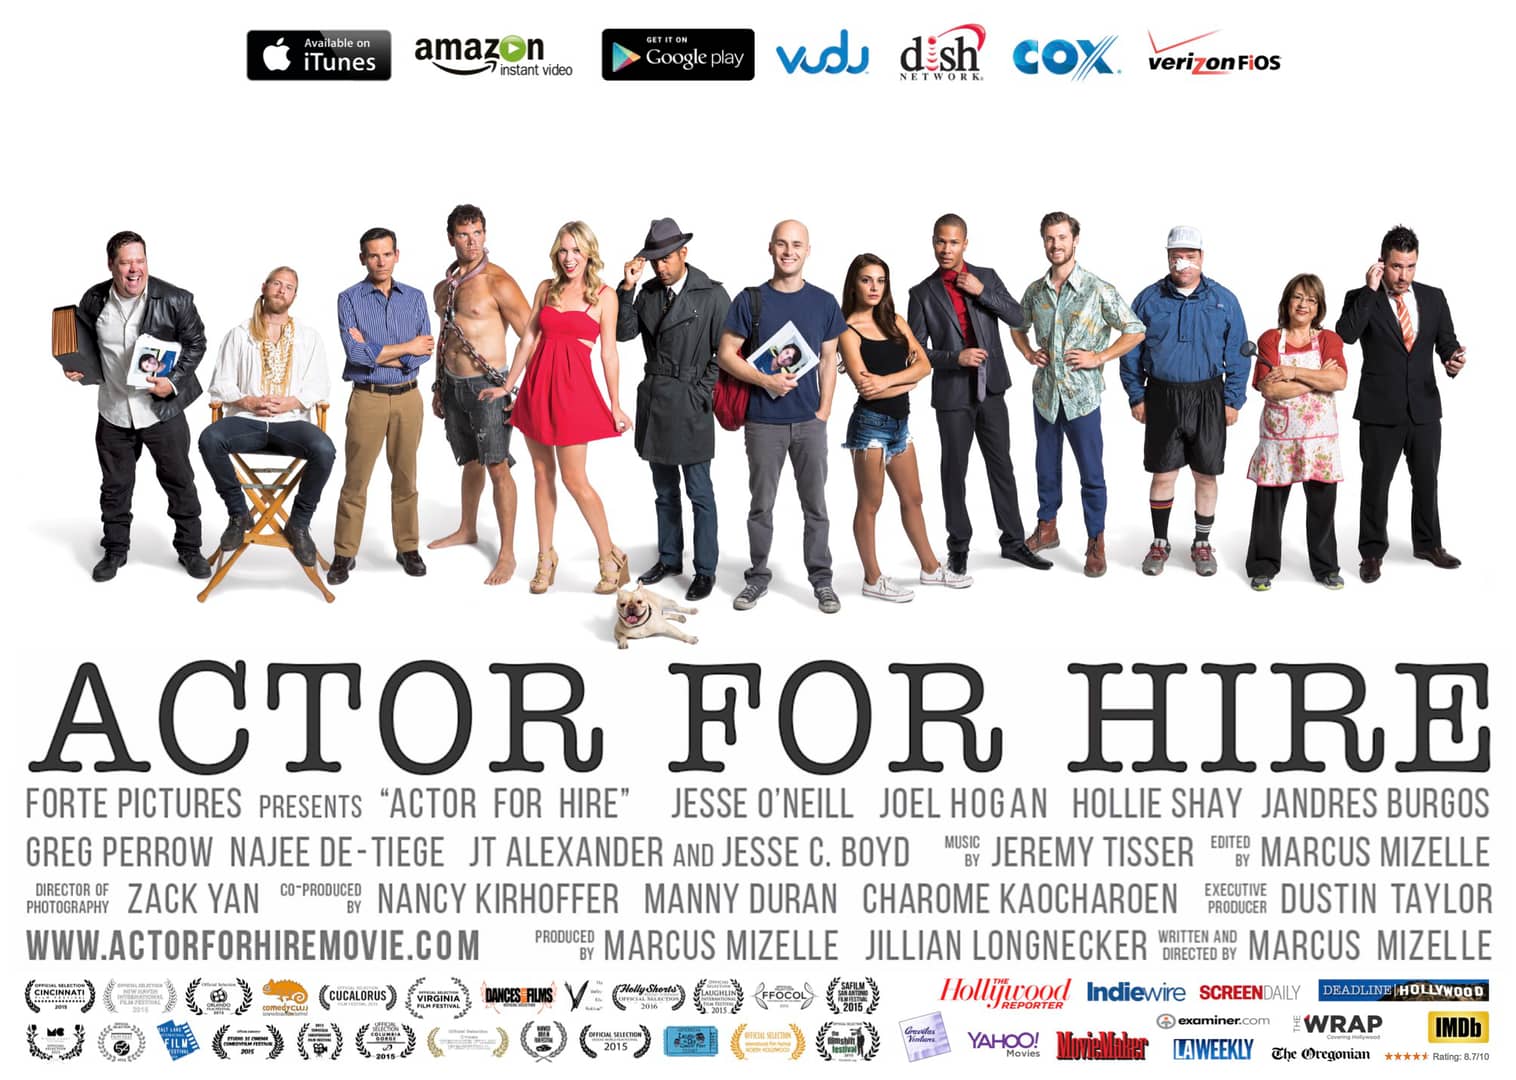 Actor For Hire - Trailer on Vimeo